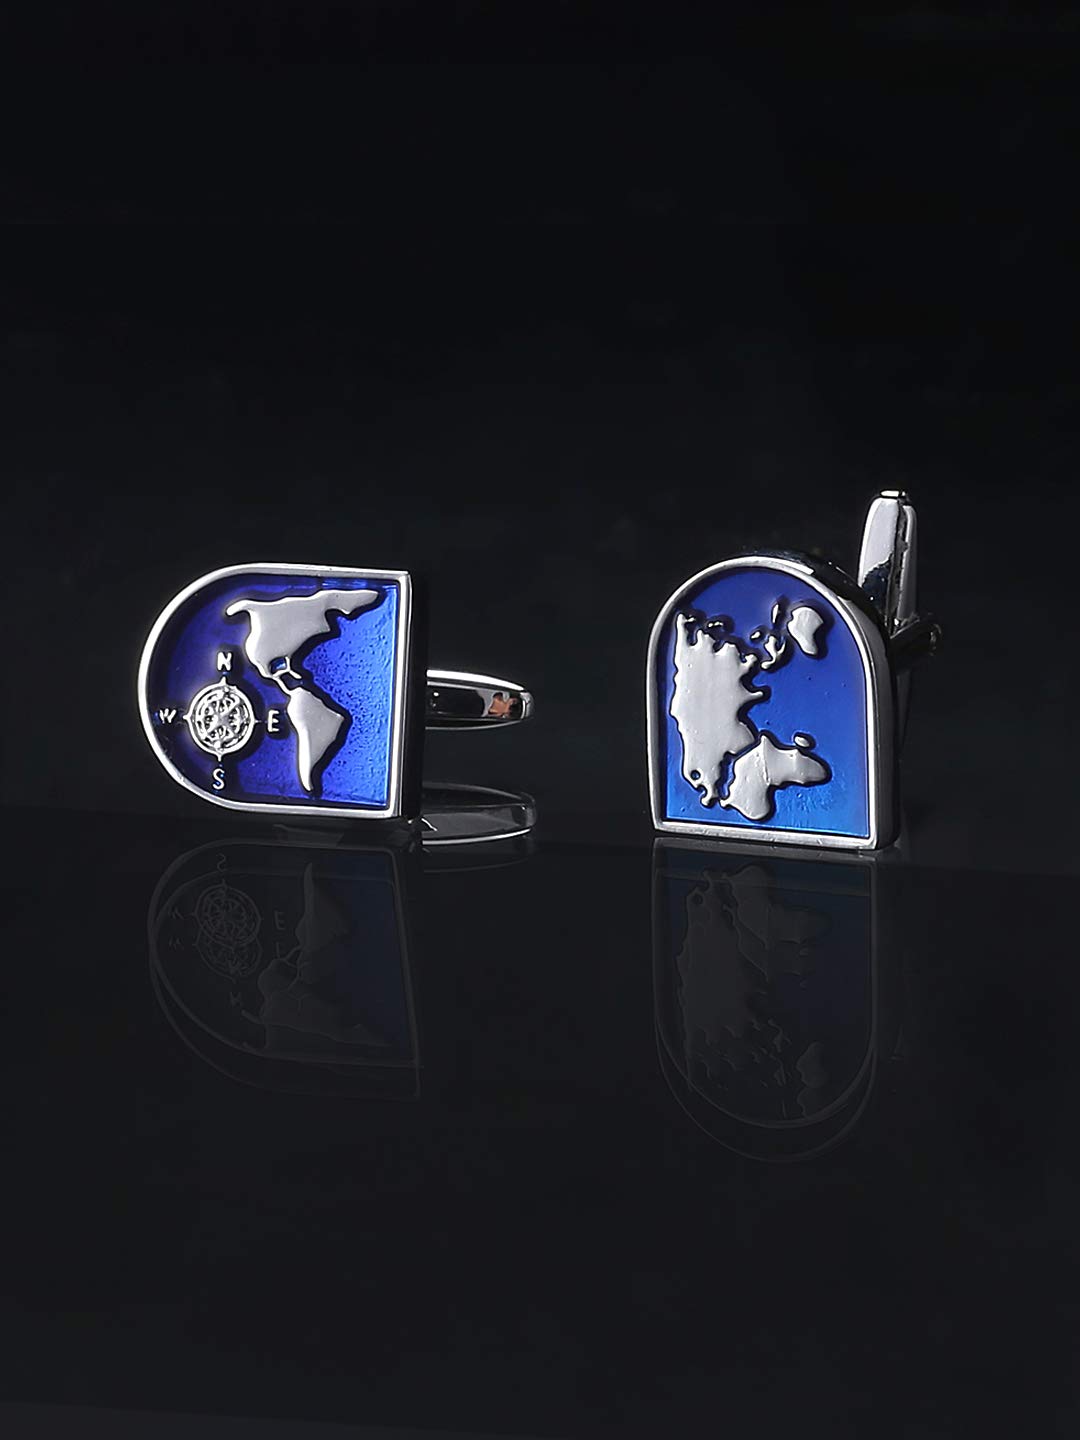 Yellow Chimes Exclusive Collection World Map Designer Cuff Links by Yellow Chimes Silver Plated Cufflink for Men Formal / Casual Cufflinks for Men